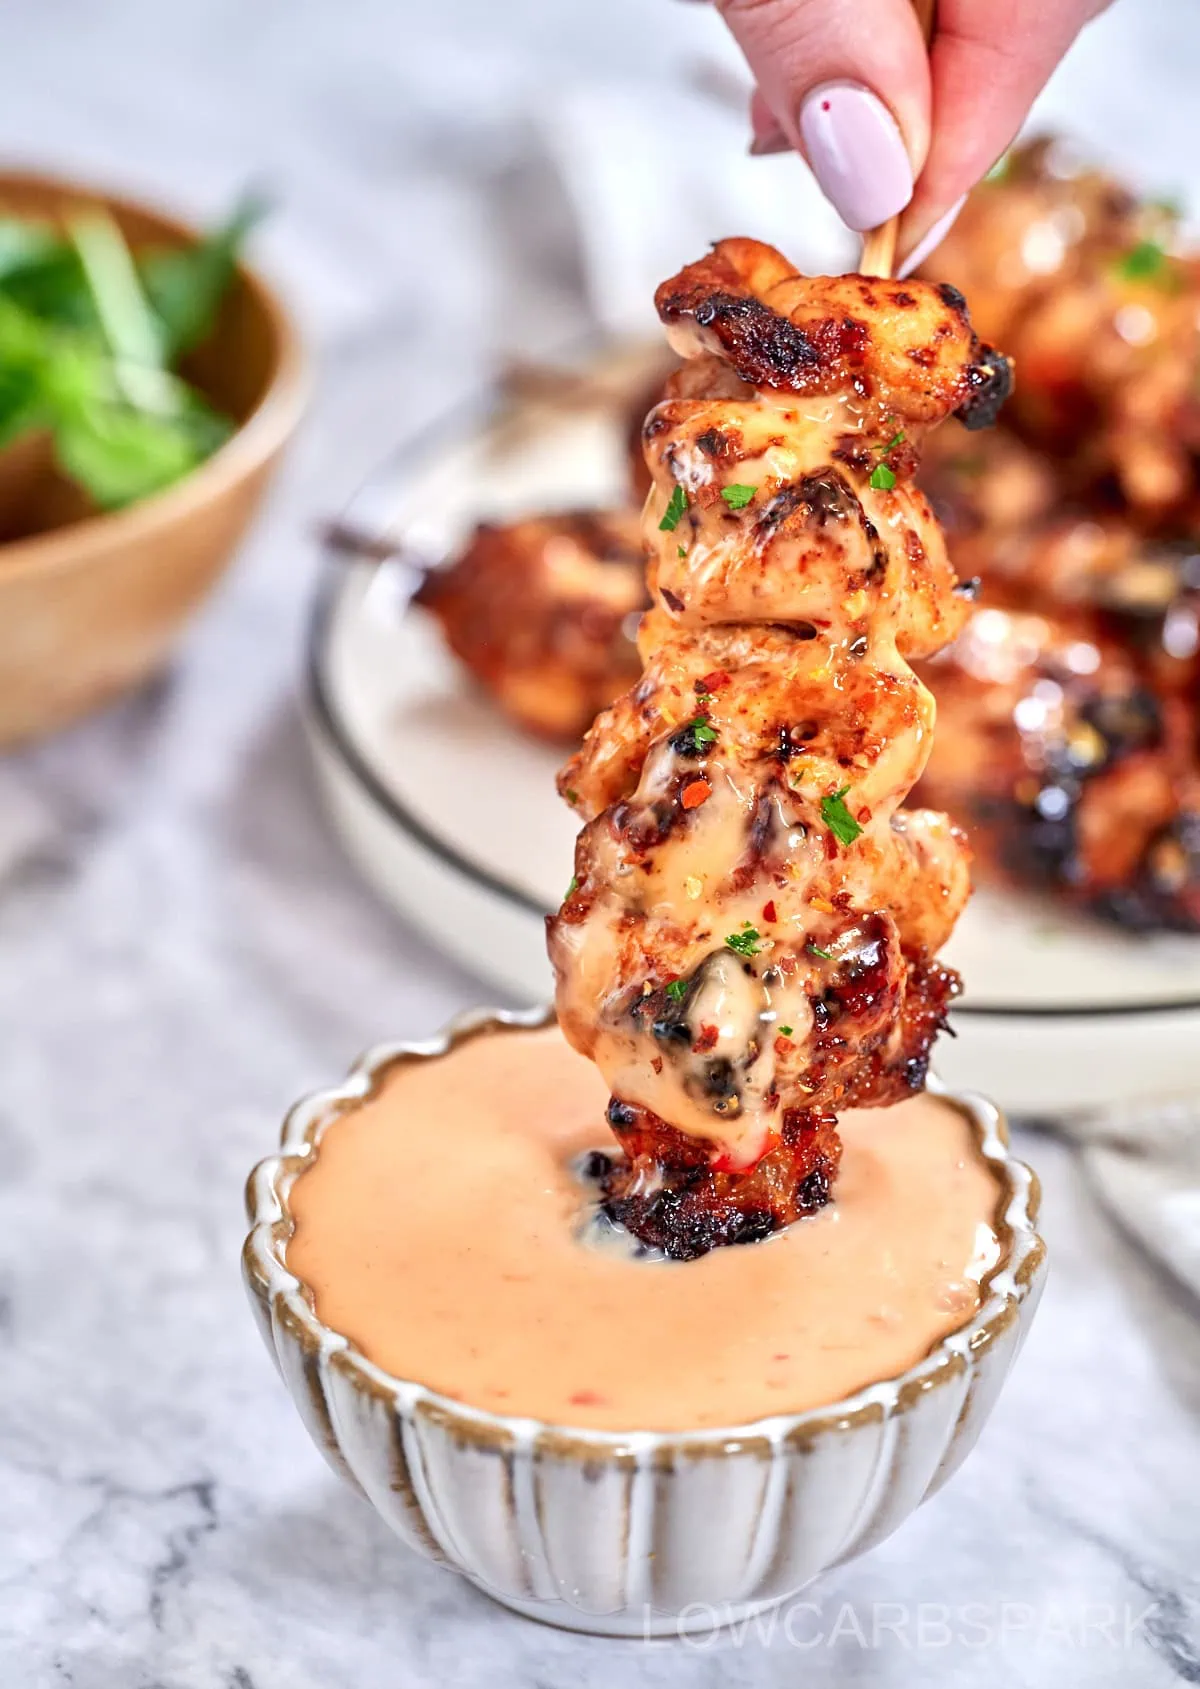 A hand with pink nails holds a chicken skewer over a small bowl of pink sauce. The cooked chicken has bits of green herbs and some charred spots. More skewers and a green salad are out of focus in the background. 